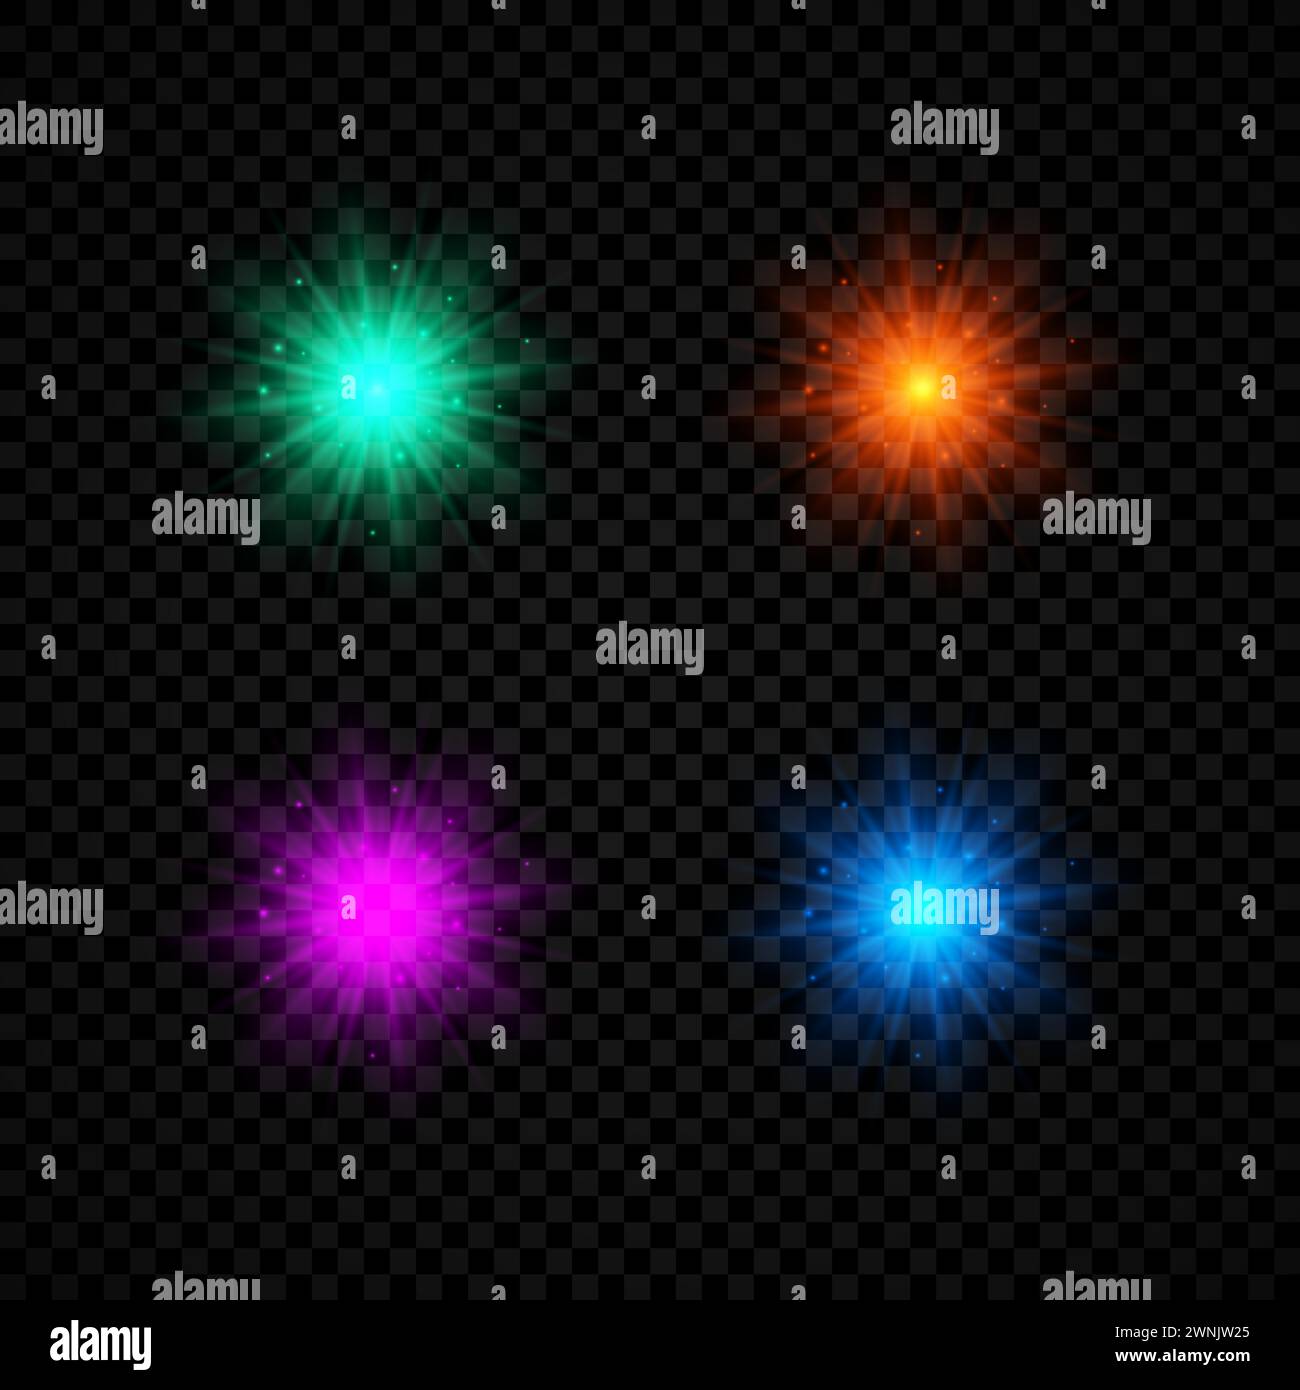 Light effect of lens flares. Set of four green, orange, purple and blue glowing lights starburst effects with sparkles on a dark transparent backgroun Stock Vector